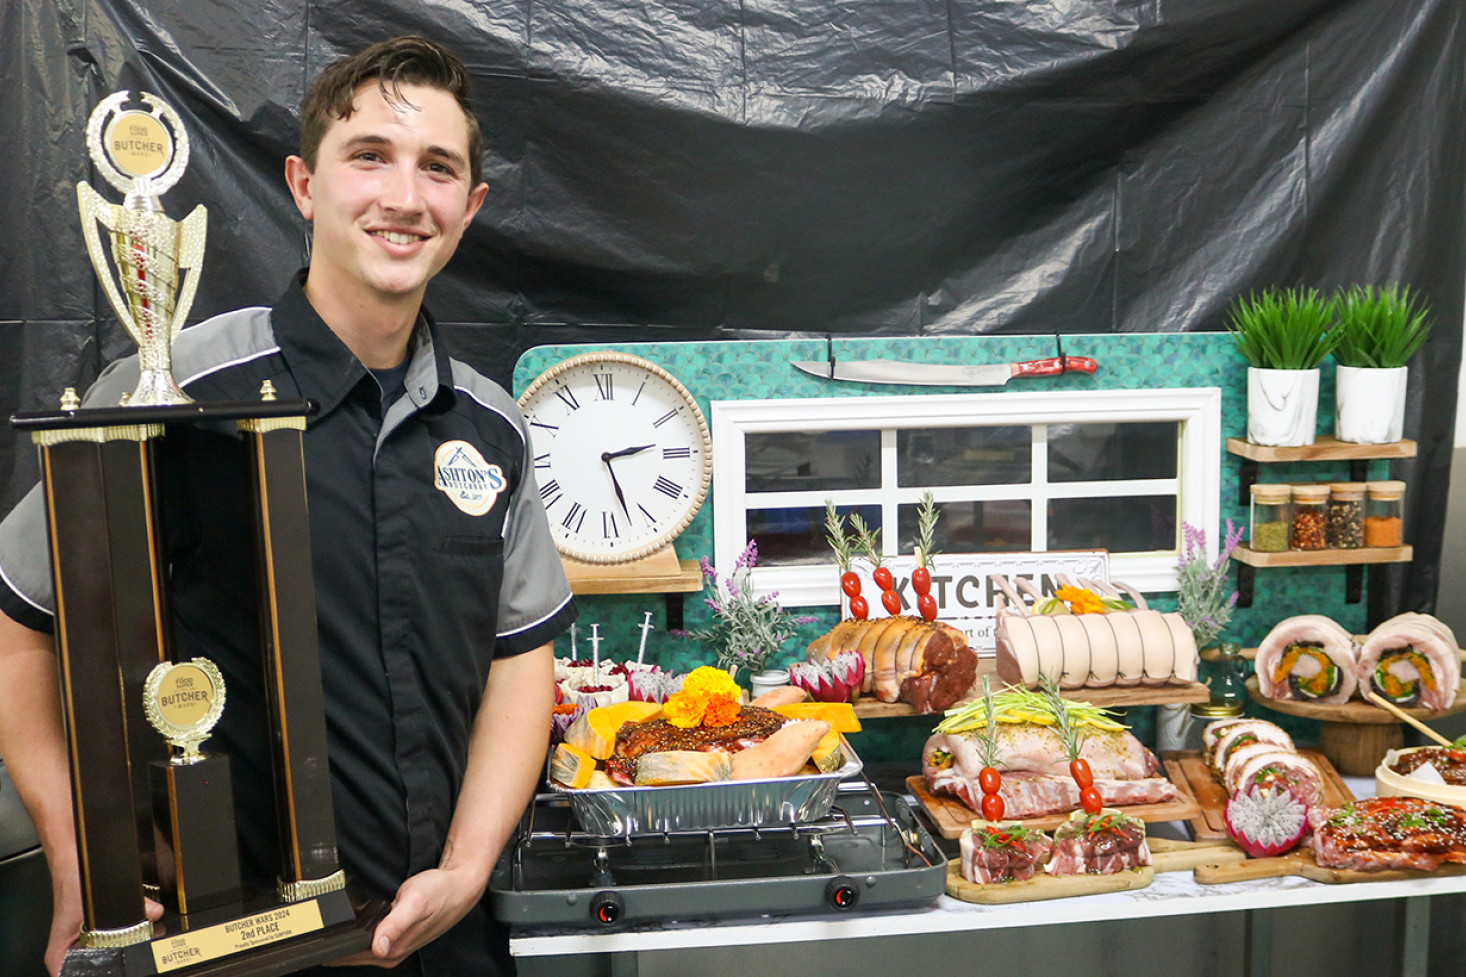 Luke Thomas placed second in the Butchers Wars competition at Meatstock in Sydney recently, and created a replica of his prized display at Ashton’s Butchery.